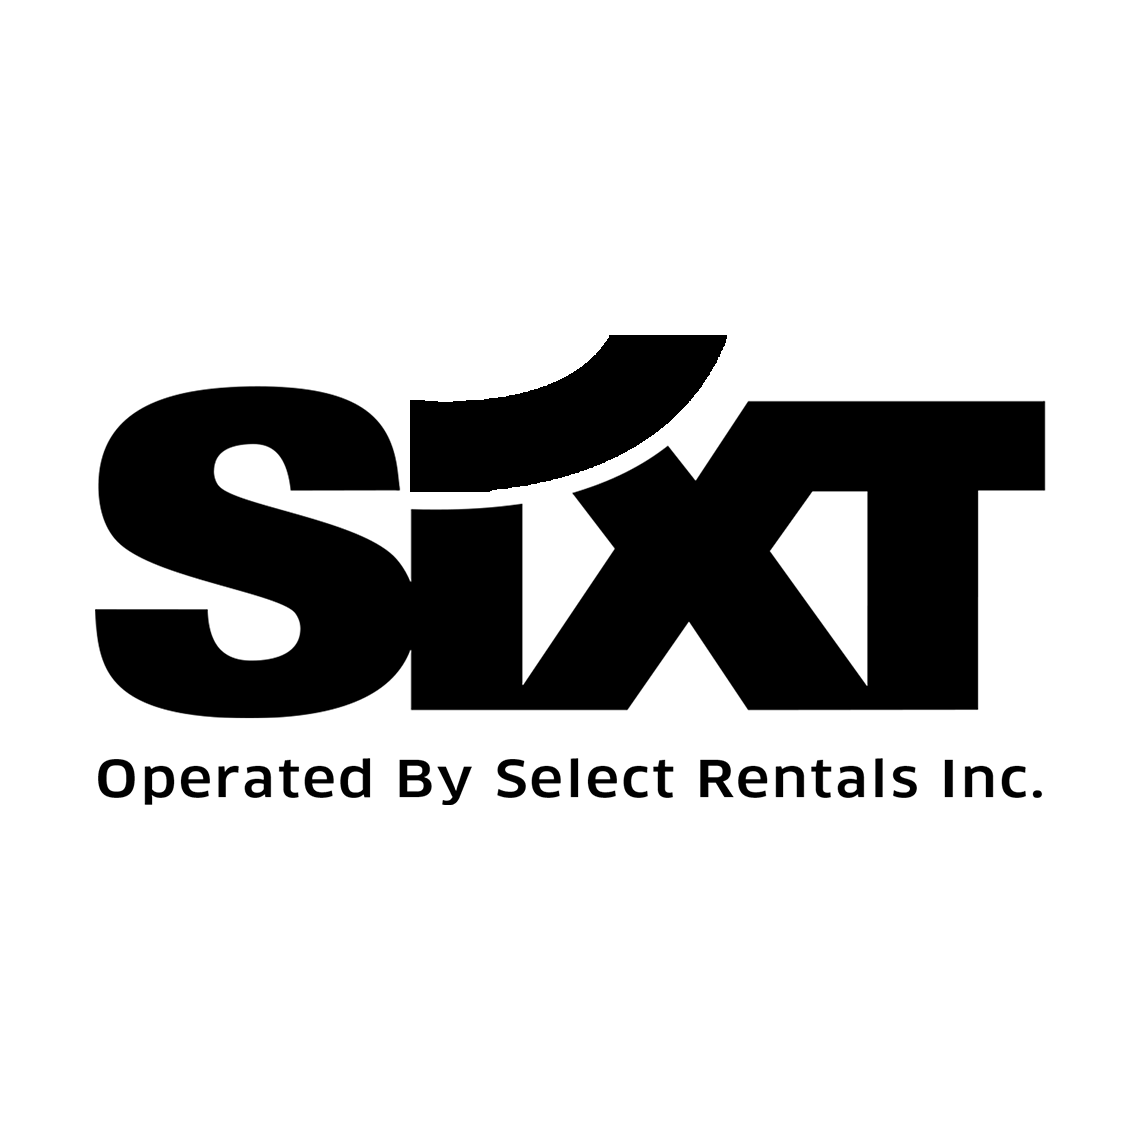 Sixt (Operated by Select Rentals)